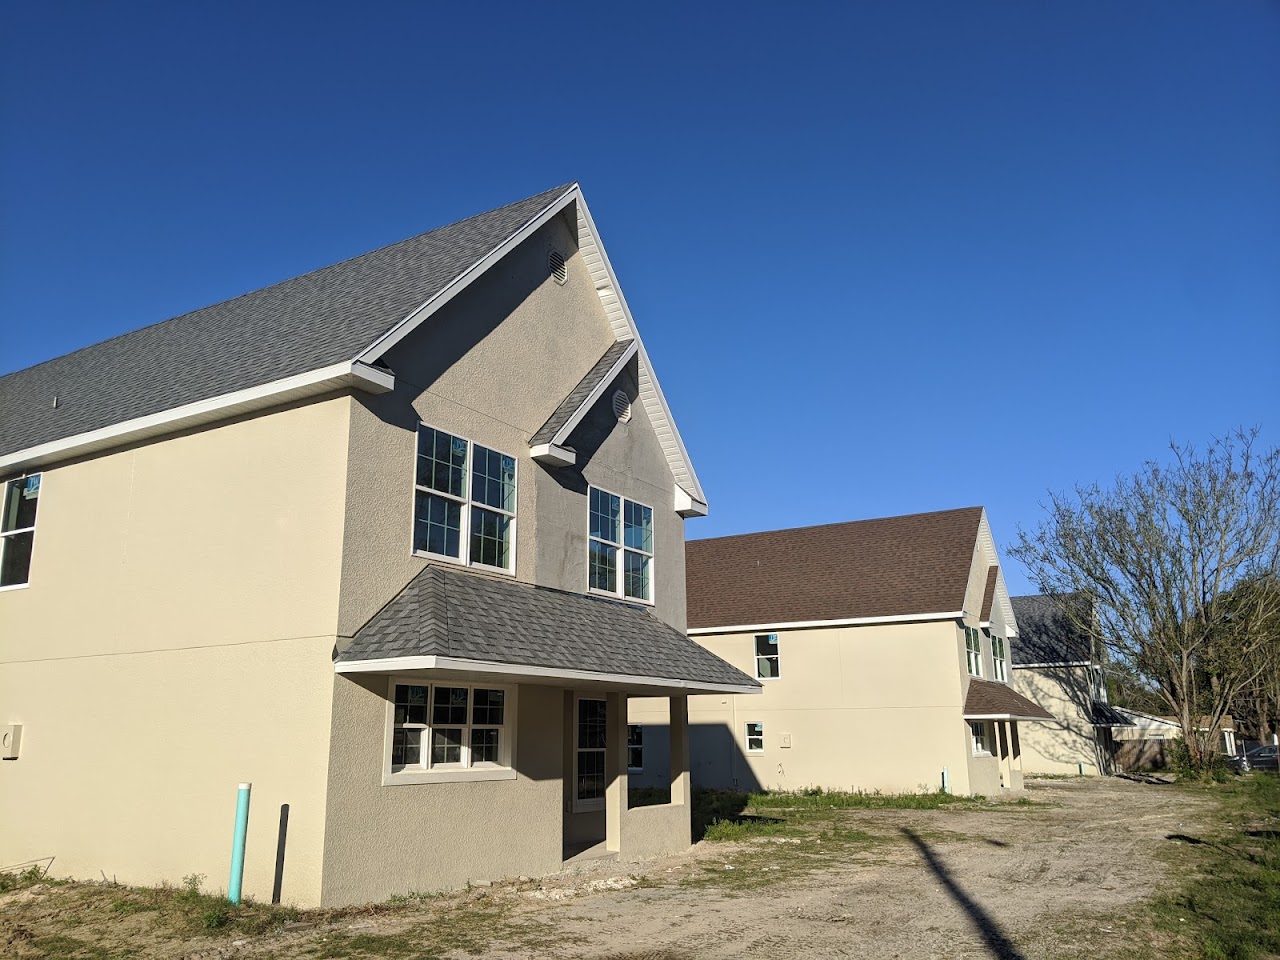 Photo of LAUREL PARK I. Affordable housing located at 100 NW 23RD AVE OCALA, FL 34475